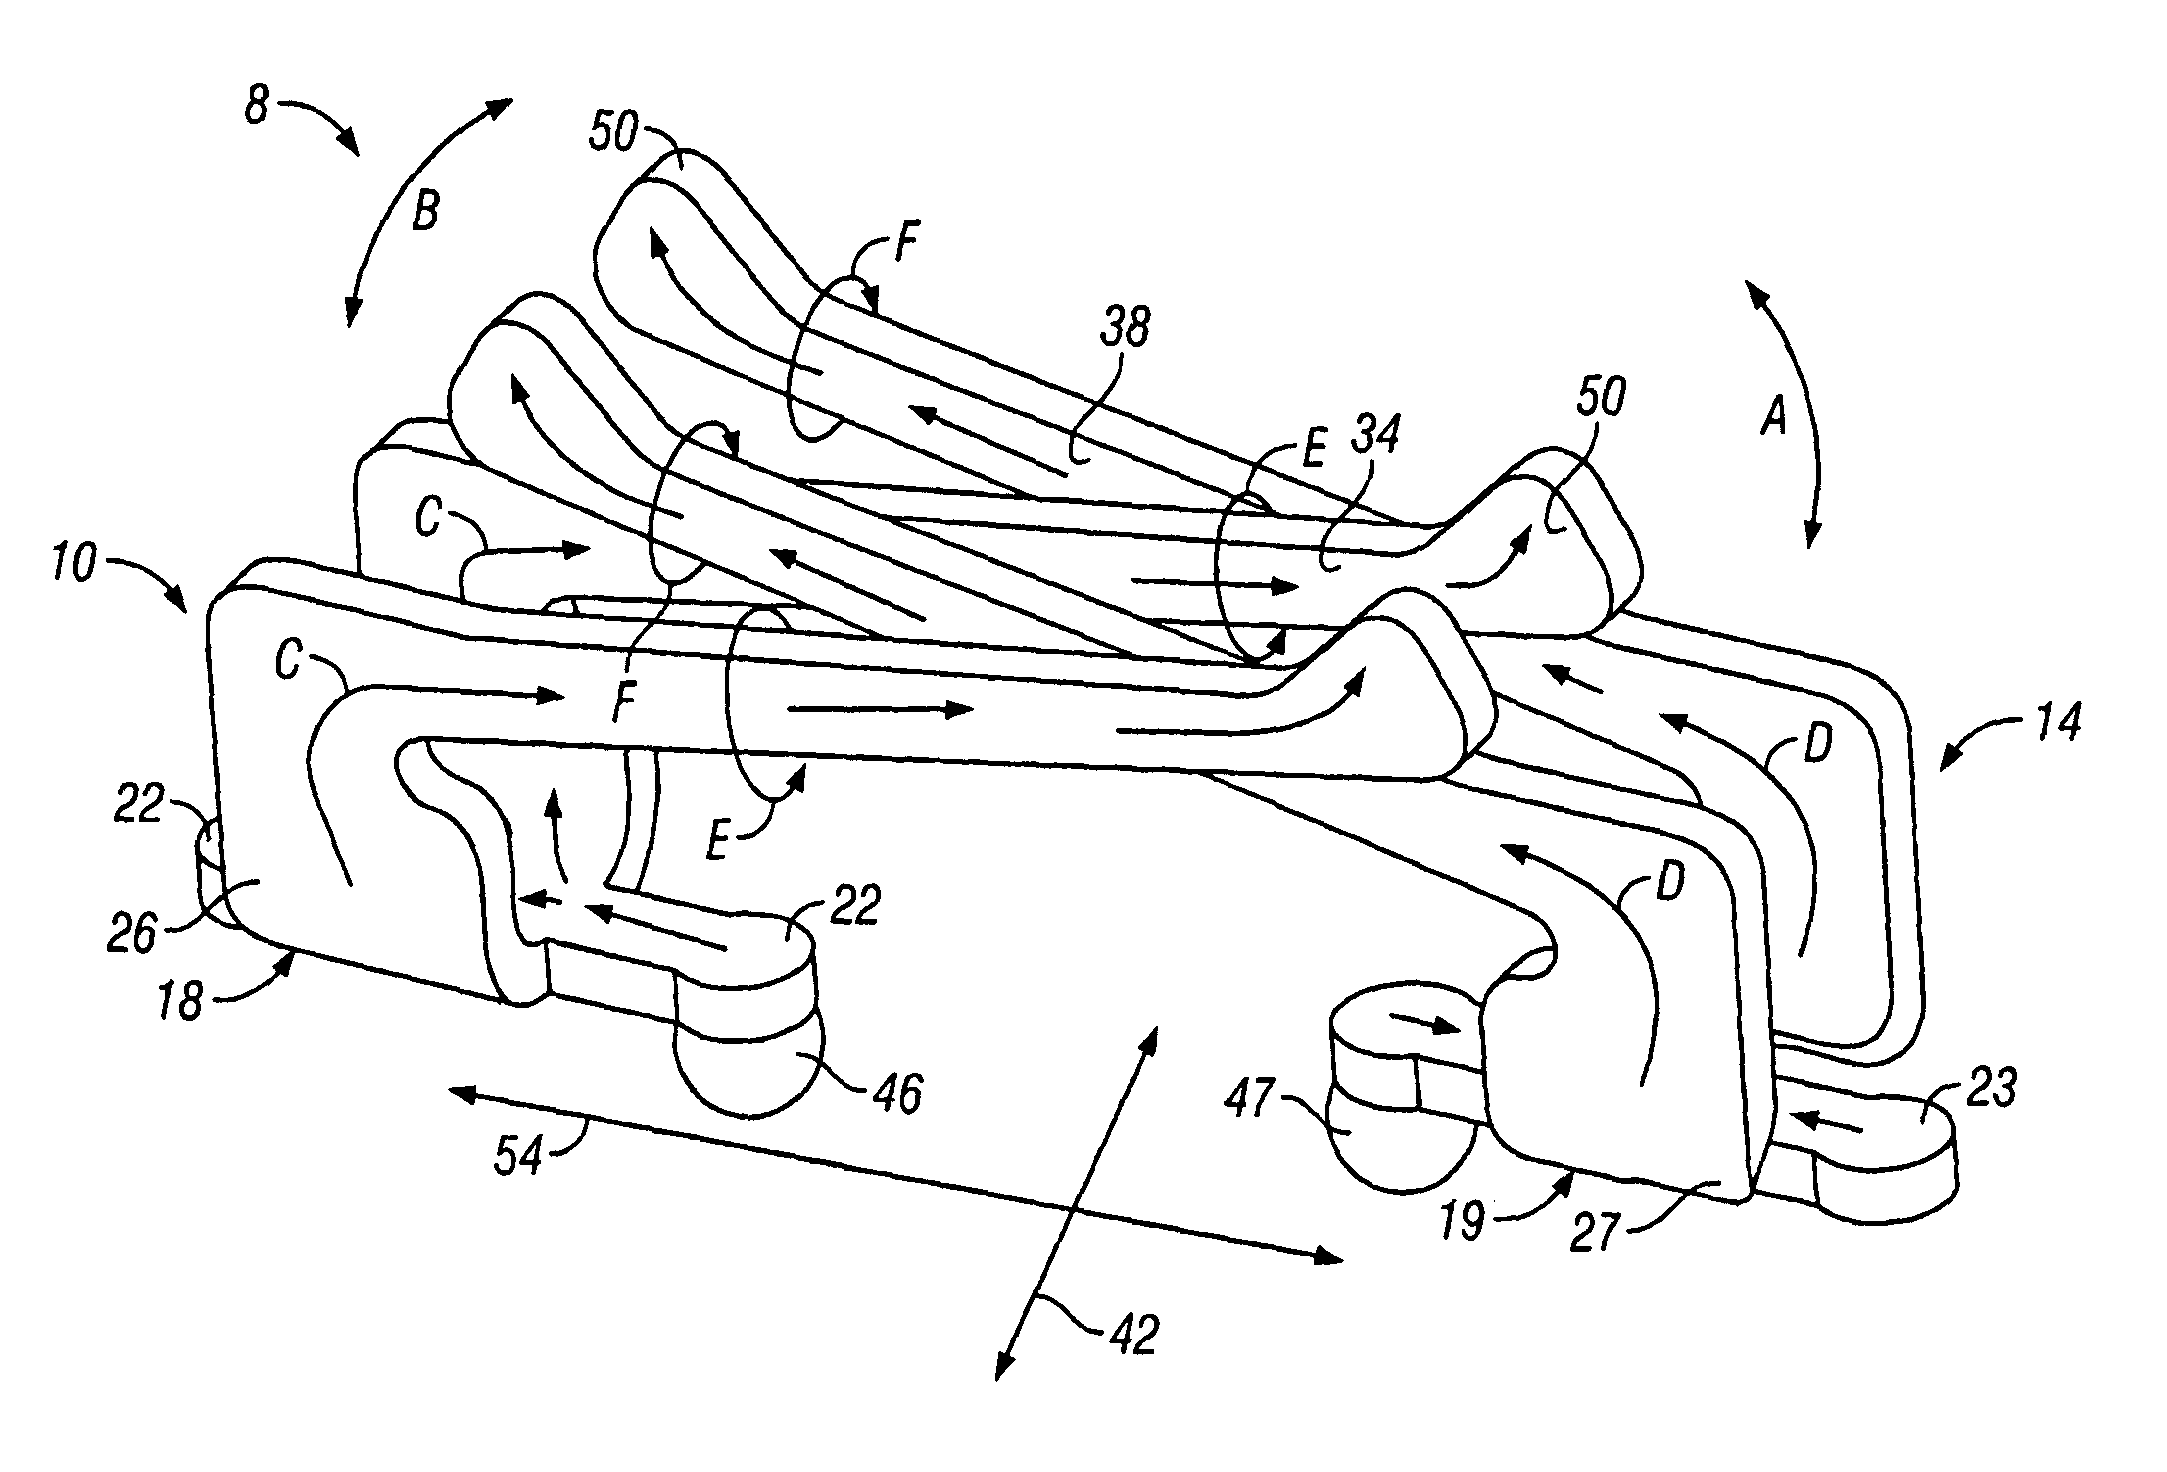 Contact having multiple contact beams